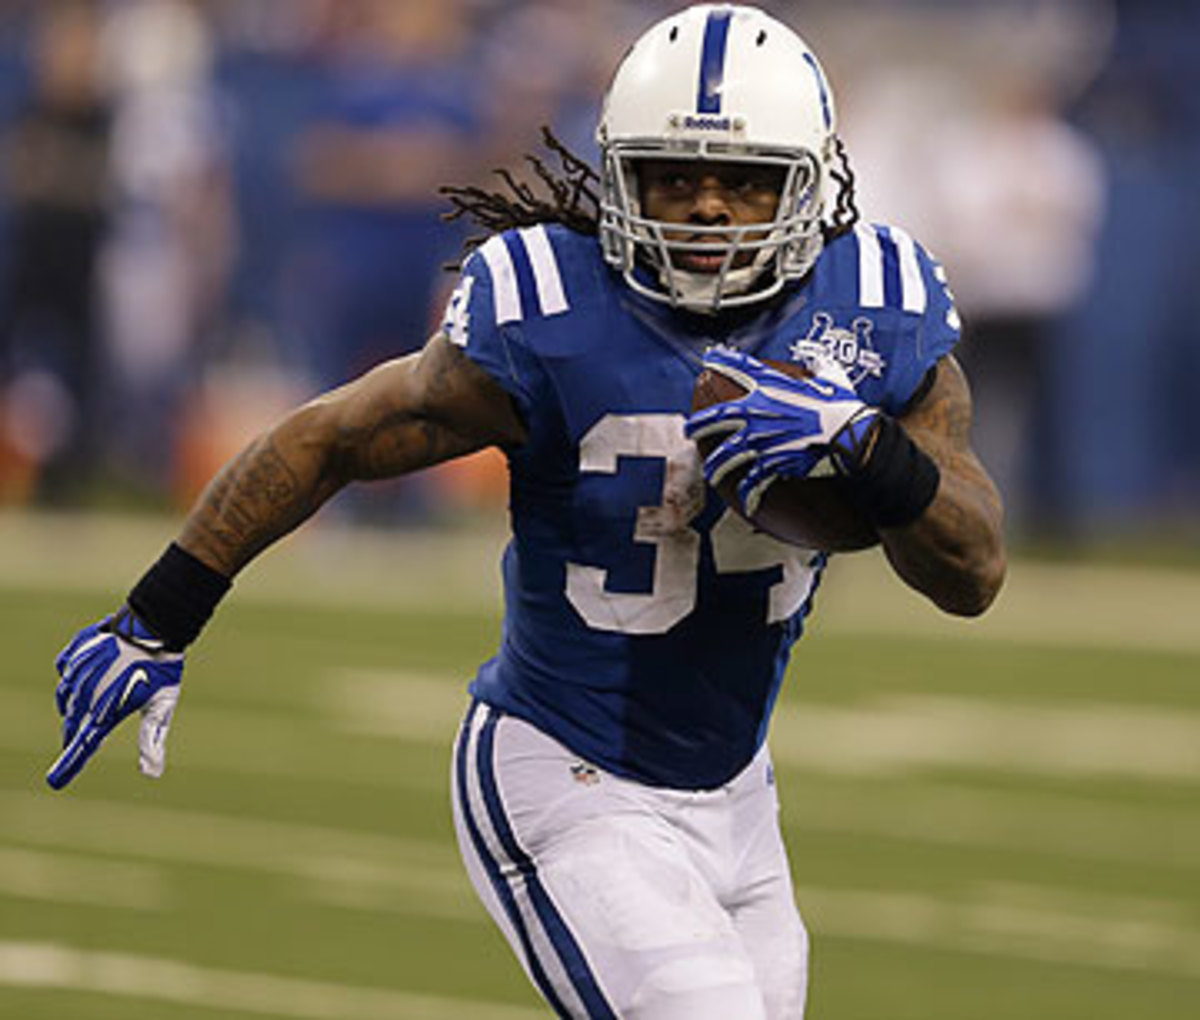 After being traded by the Browns last September, Trent Richardson disappointed as a Colt. (Darron Cummings/AP)